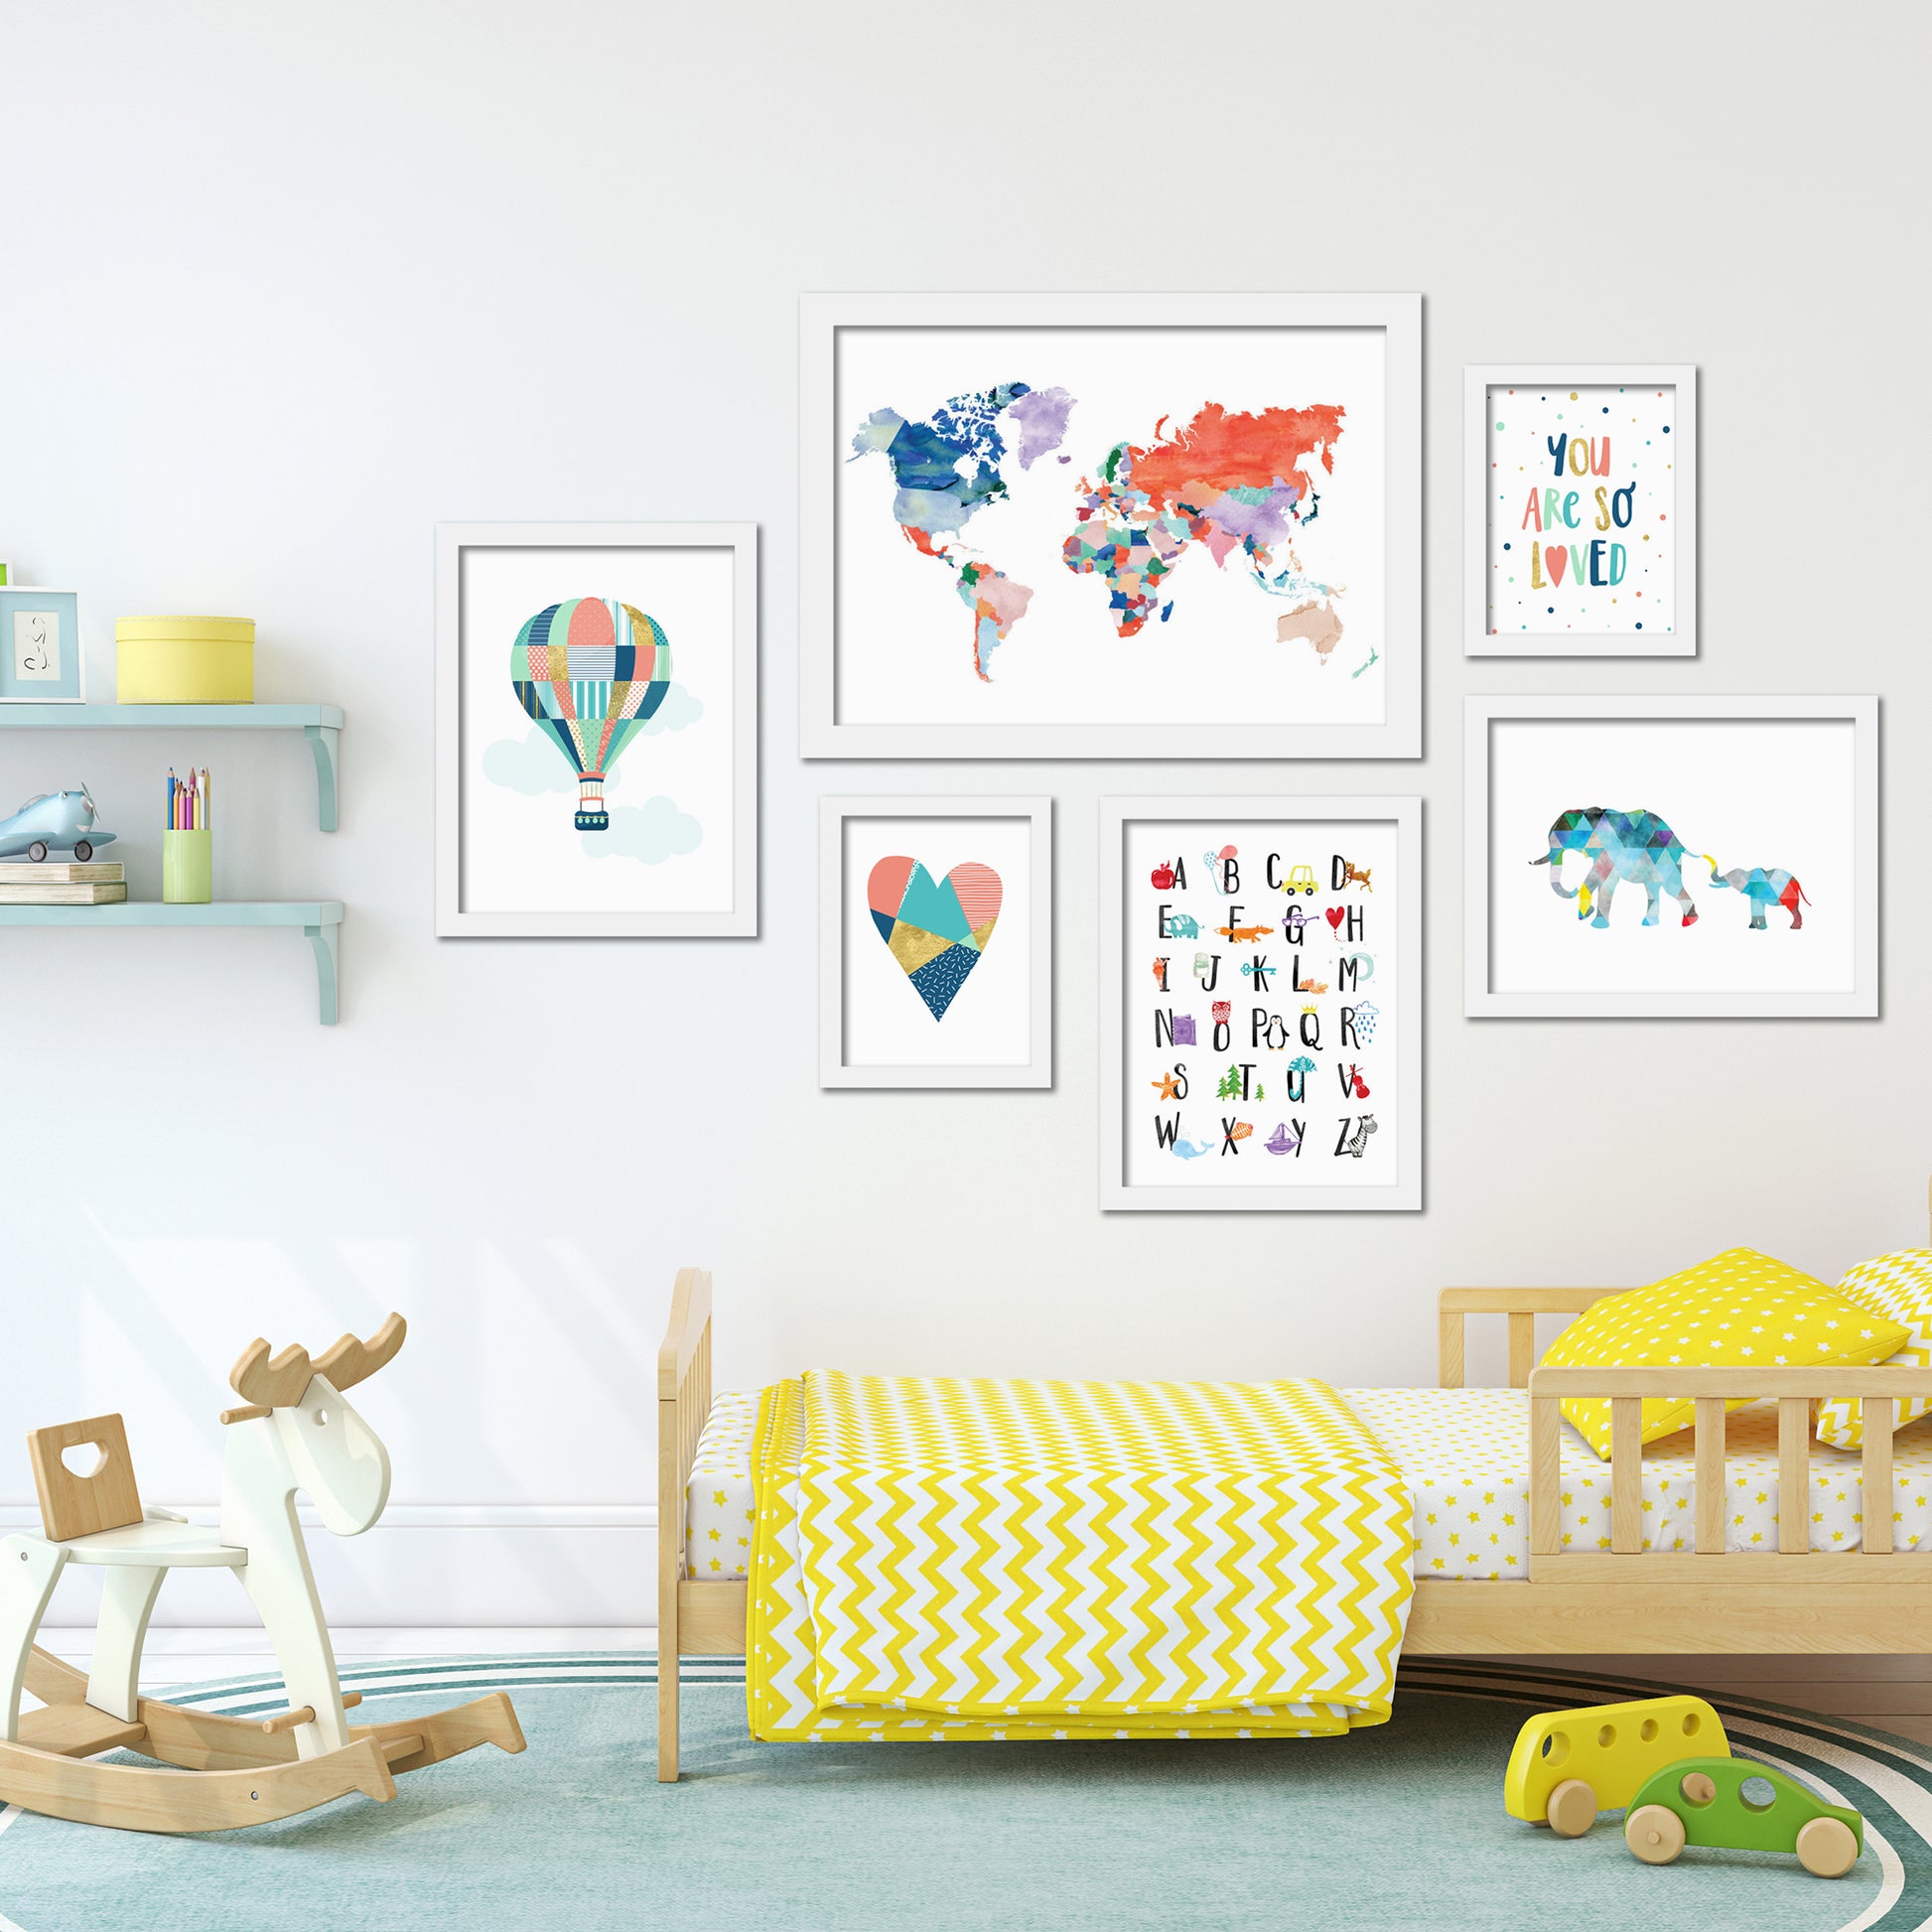 Americanflat 6 Piece White Framed Gallery Wall Art Set - Colorful Children's Art Set